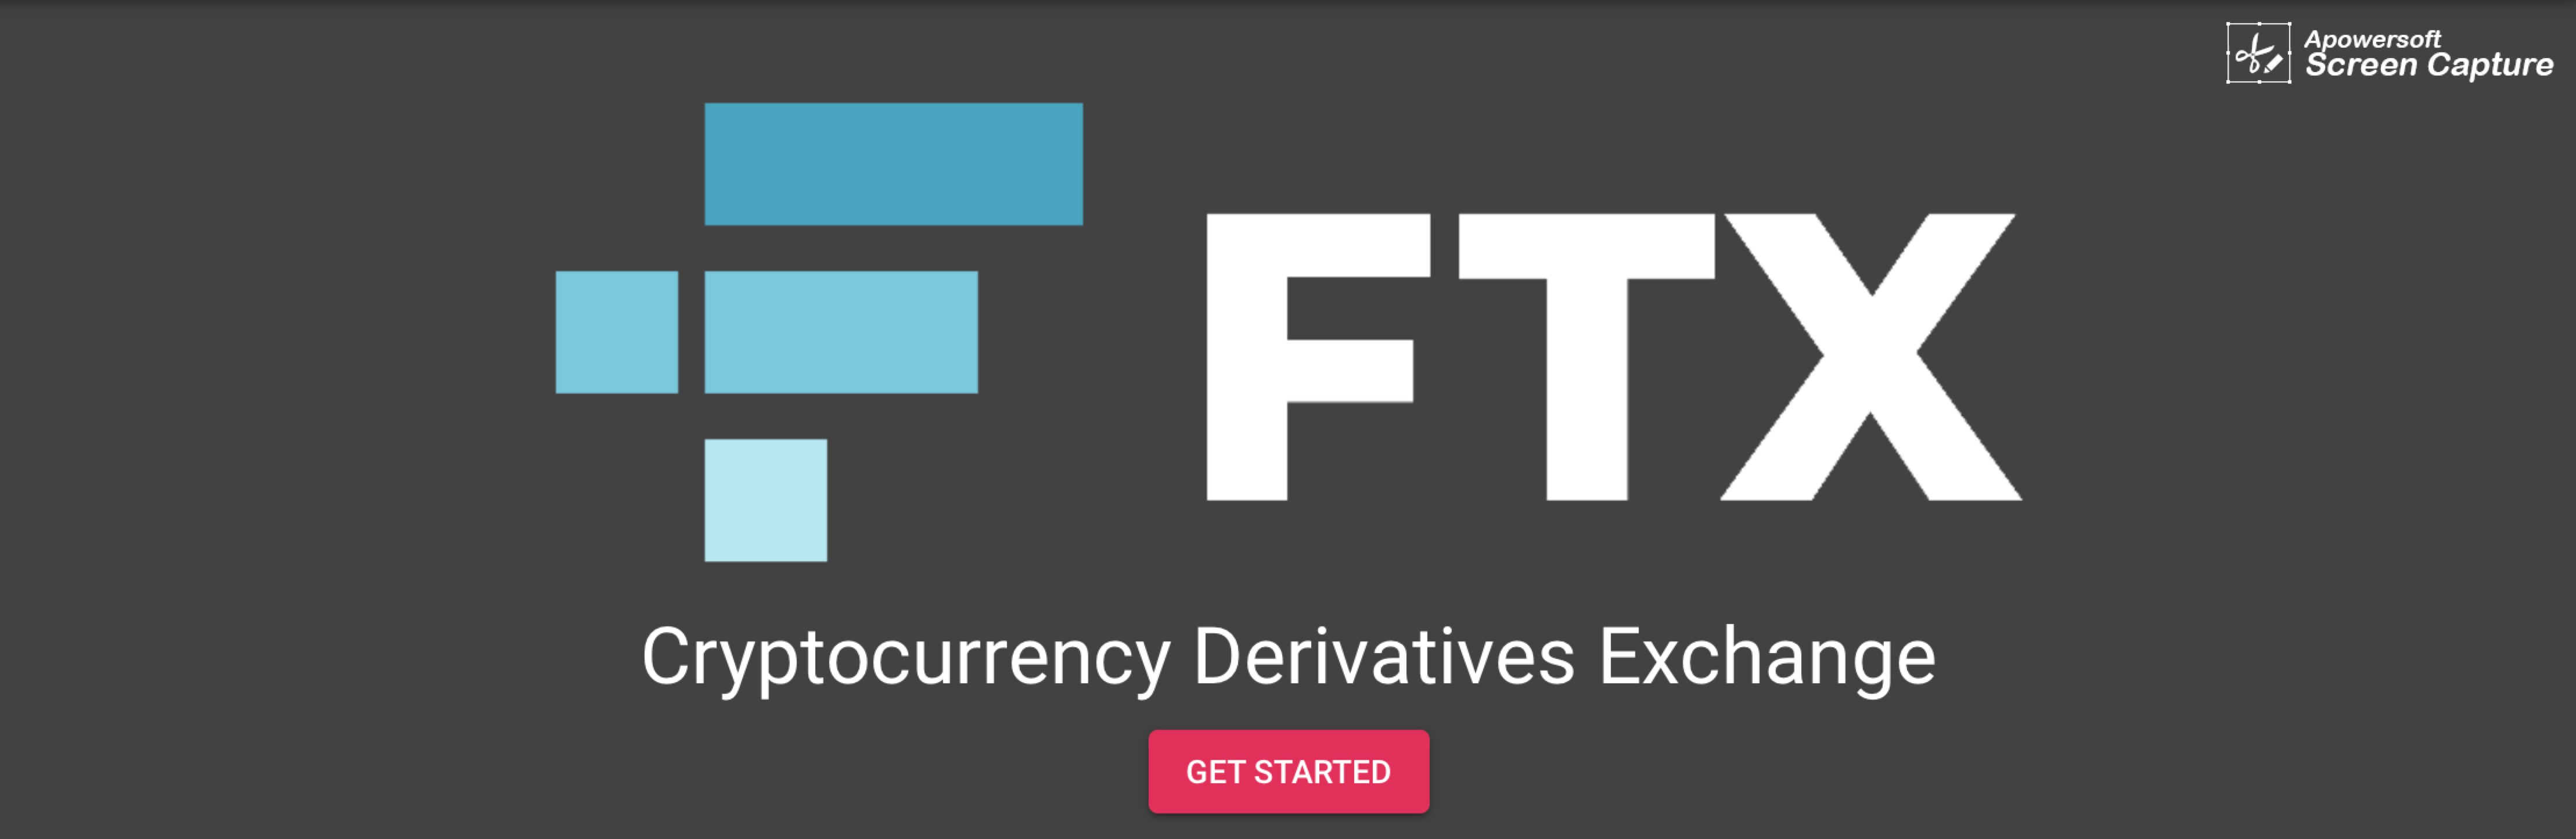 FTX: Cryptocurrency Derivatives Exchange | LinkedIn